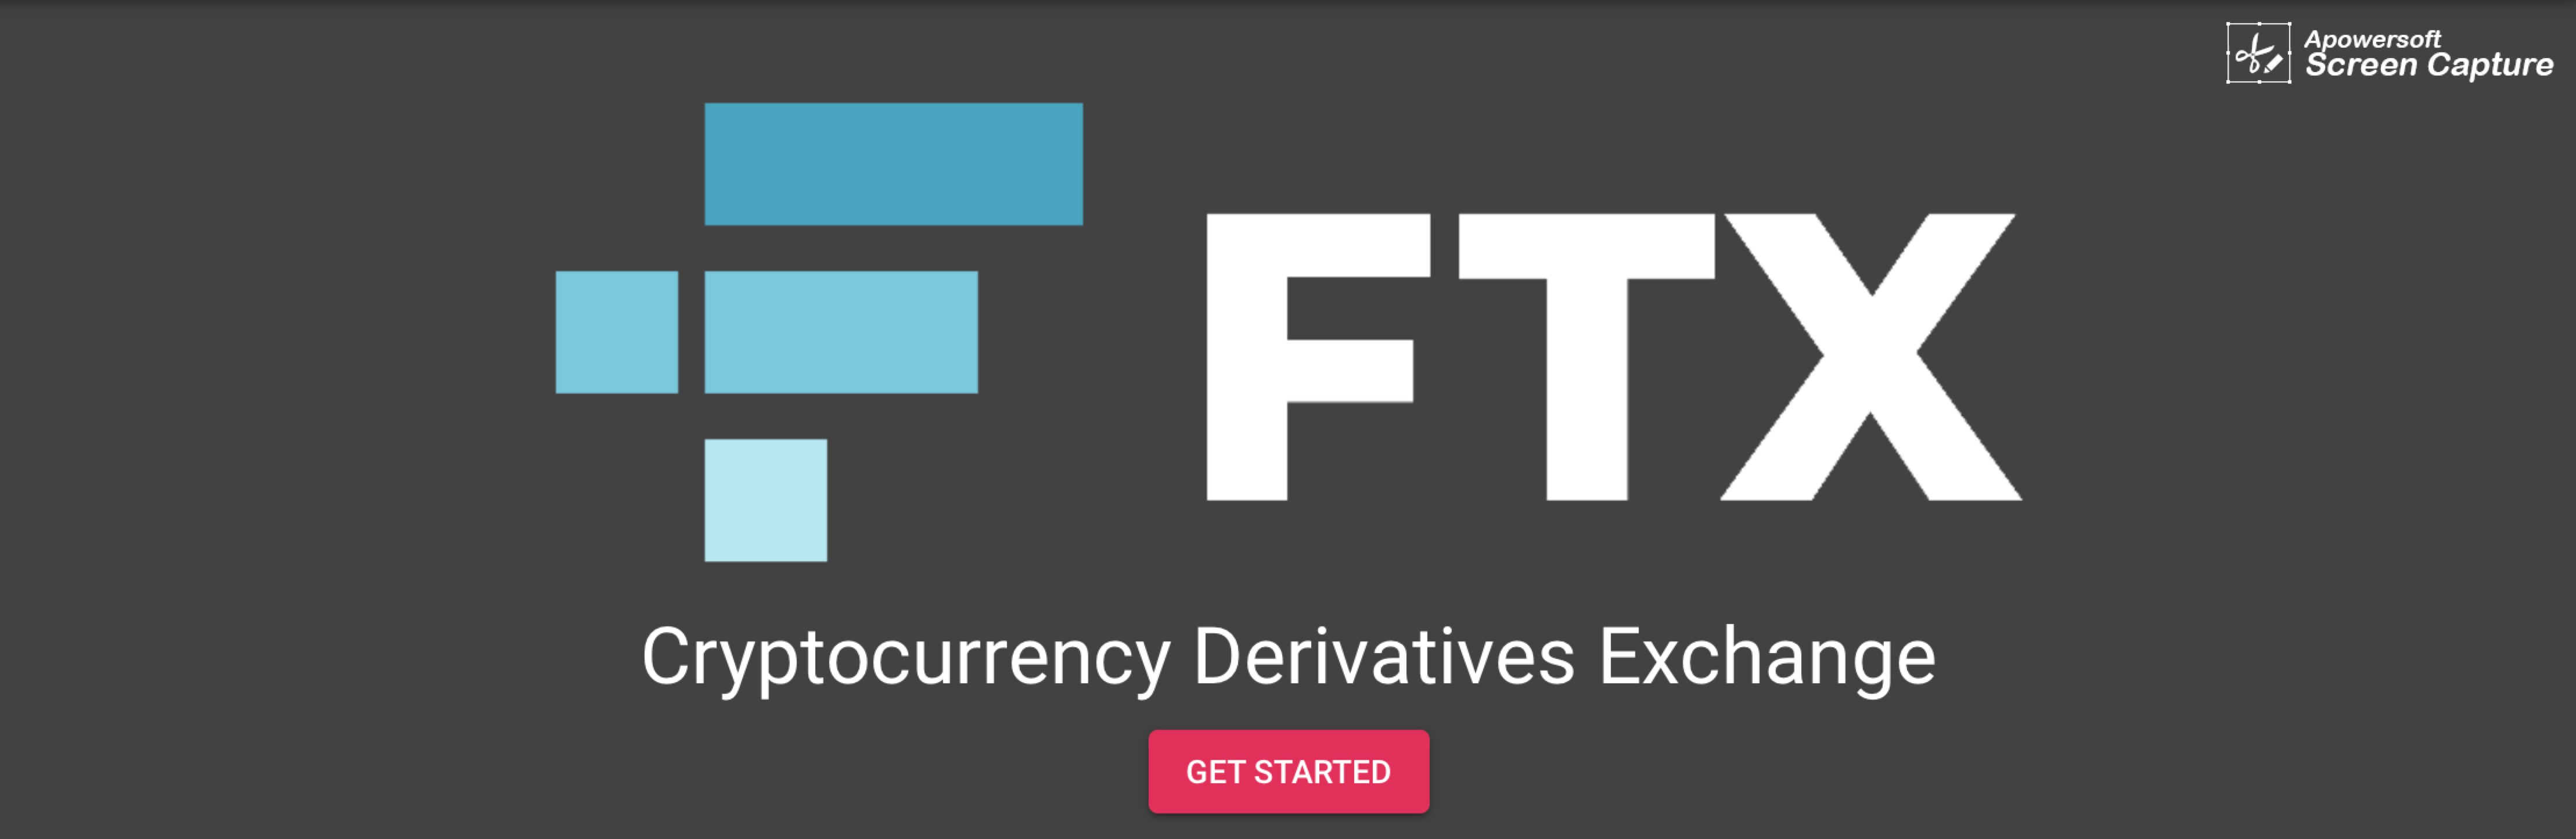 FTX: Cryptocurrency Derivatives Exchange | LinkedIn